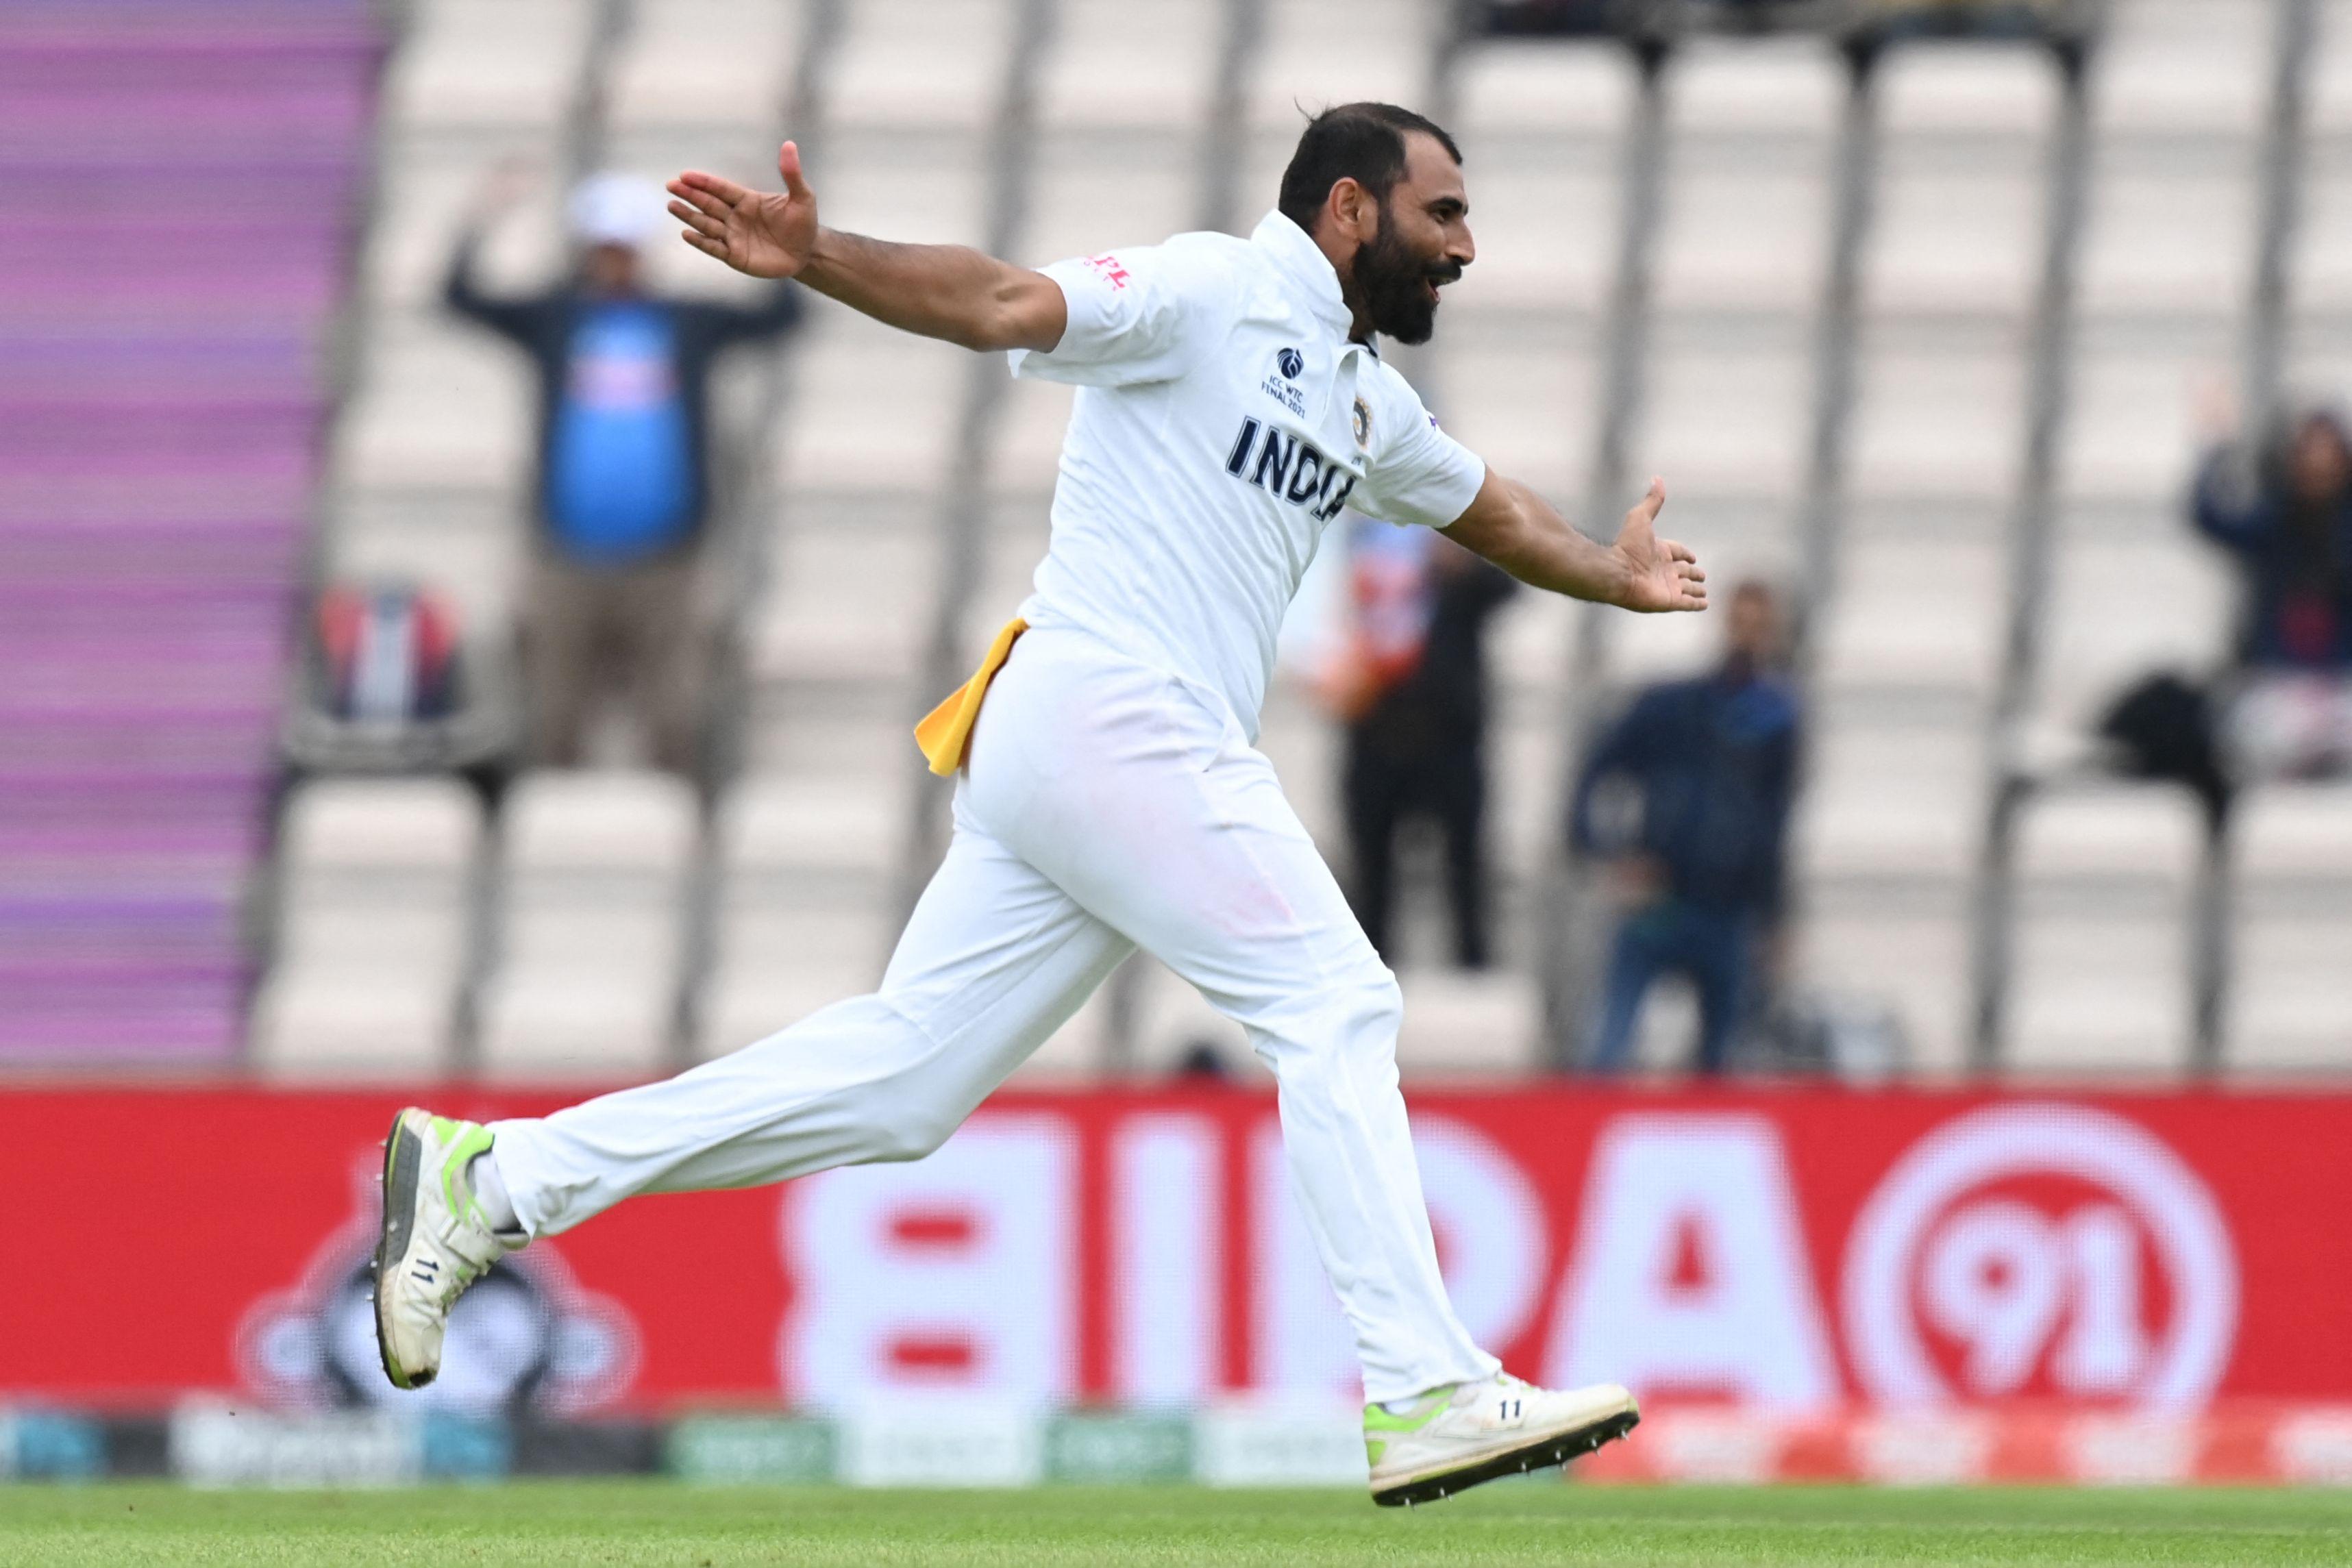 Mohammed Shami wraps himself in towel at boundary line